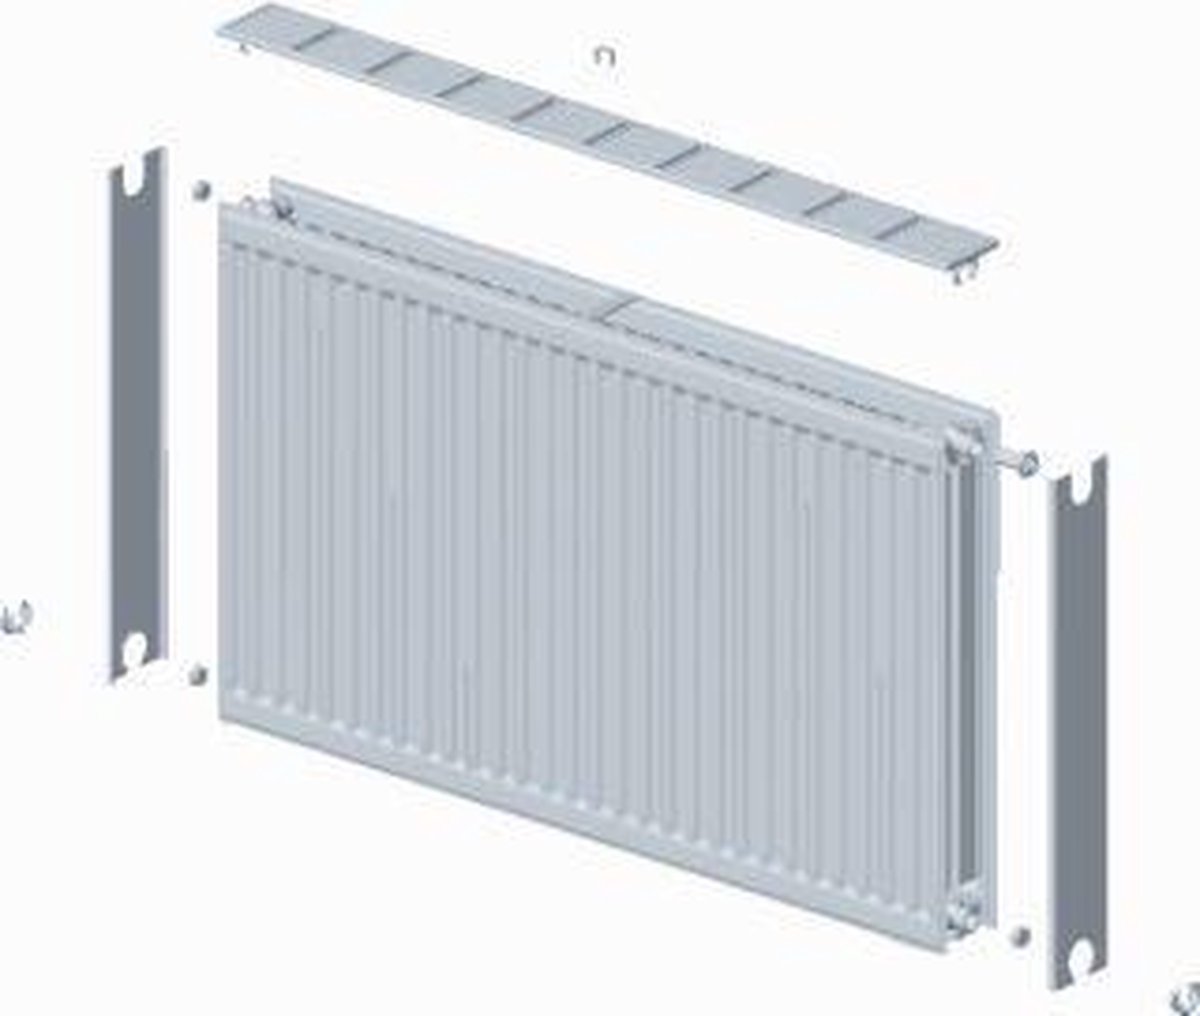 Stelrad paneelradiator Novello, staal, wit, (hxlxd) 500x3000x100mm, 22